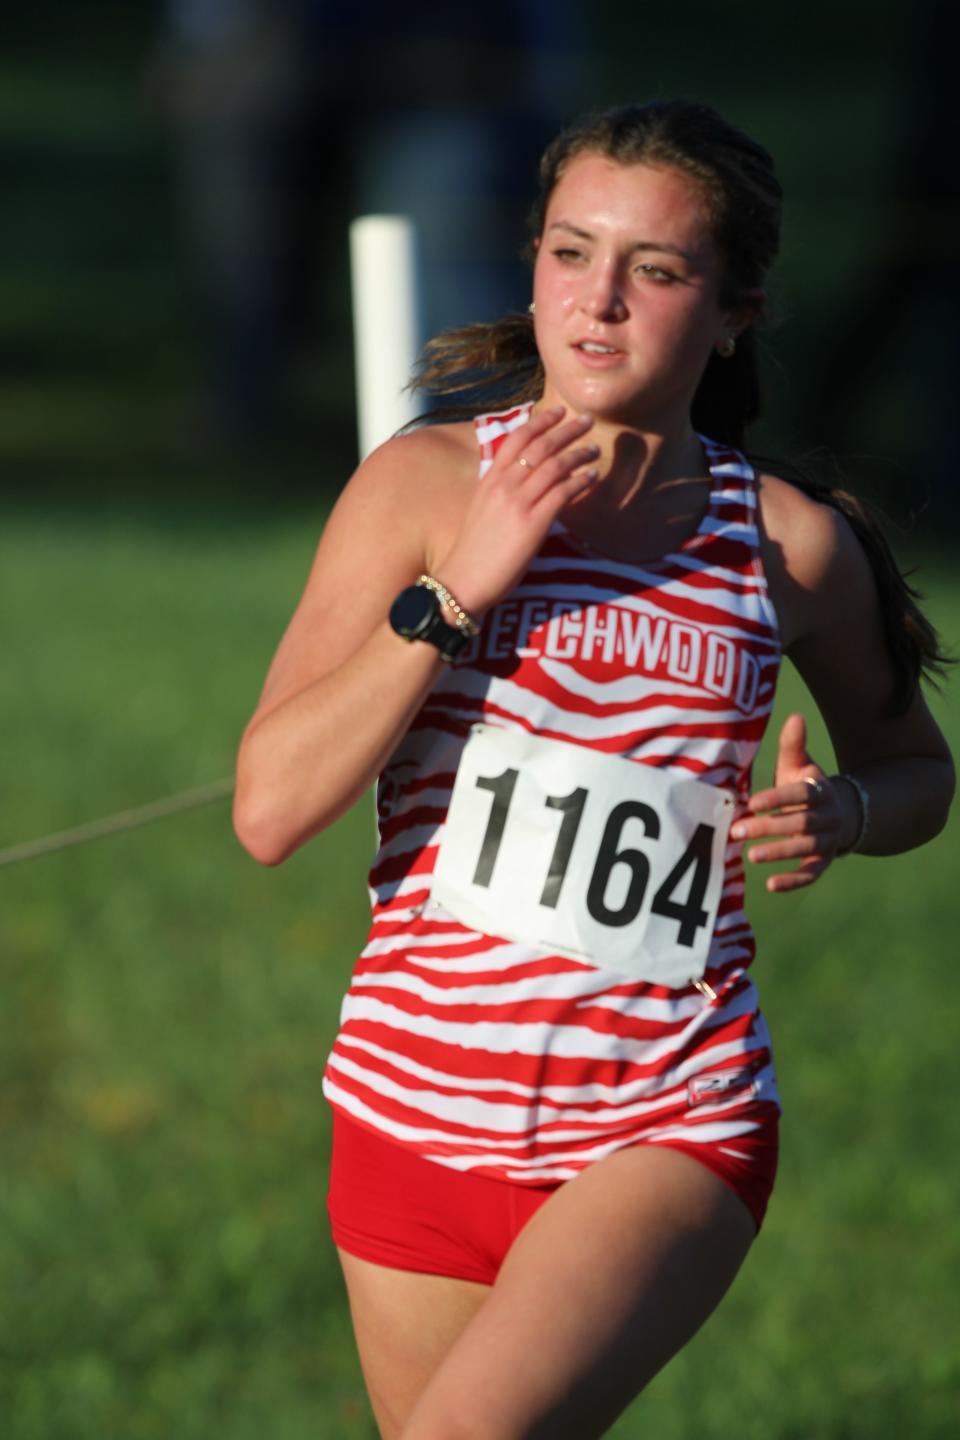 Beechwood's Lily Parke is the Enquirer's Northern Kentucky runner of the year for girls in 2023.